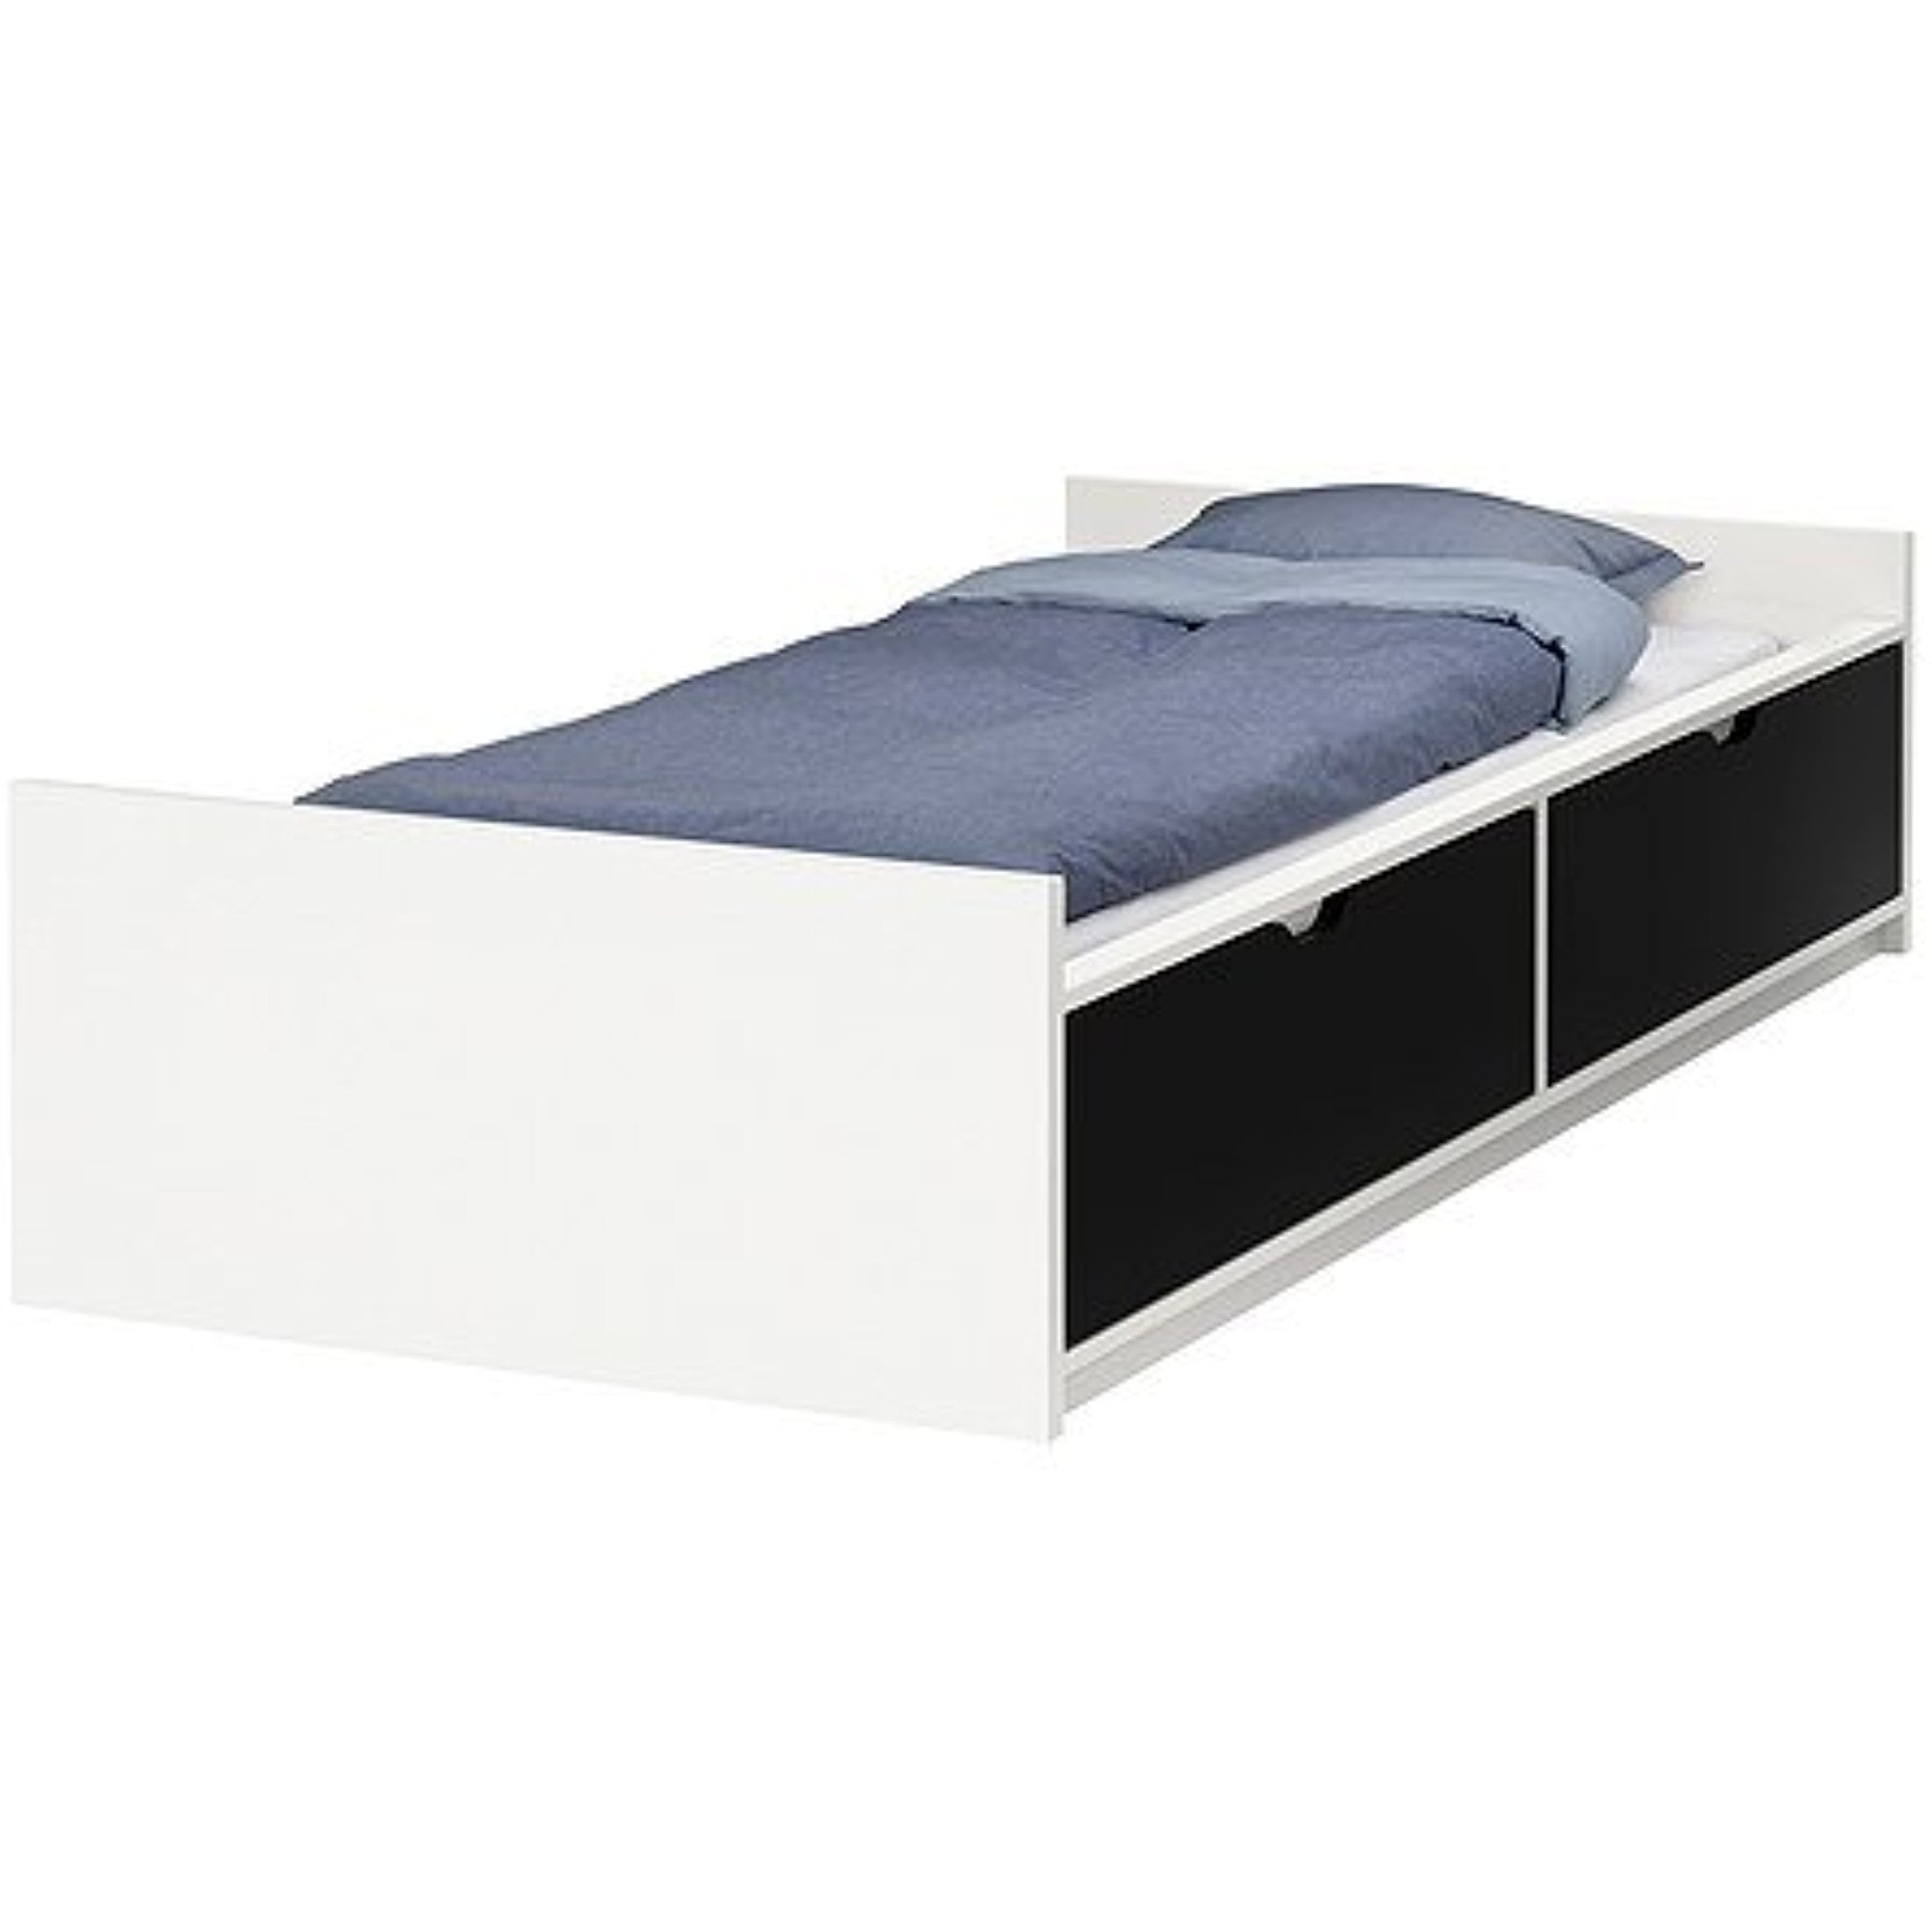 Ikea Twin Size Bed Frame W Storage, How Wide Is A Twin Xl Bed Frame